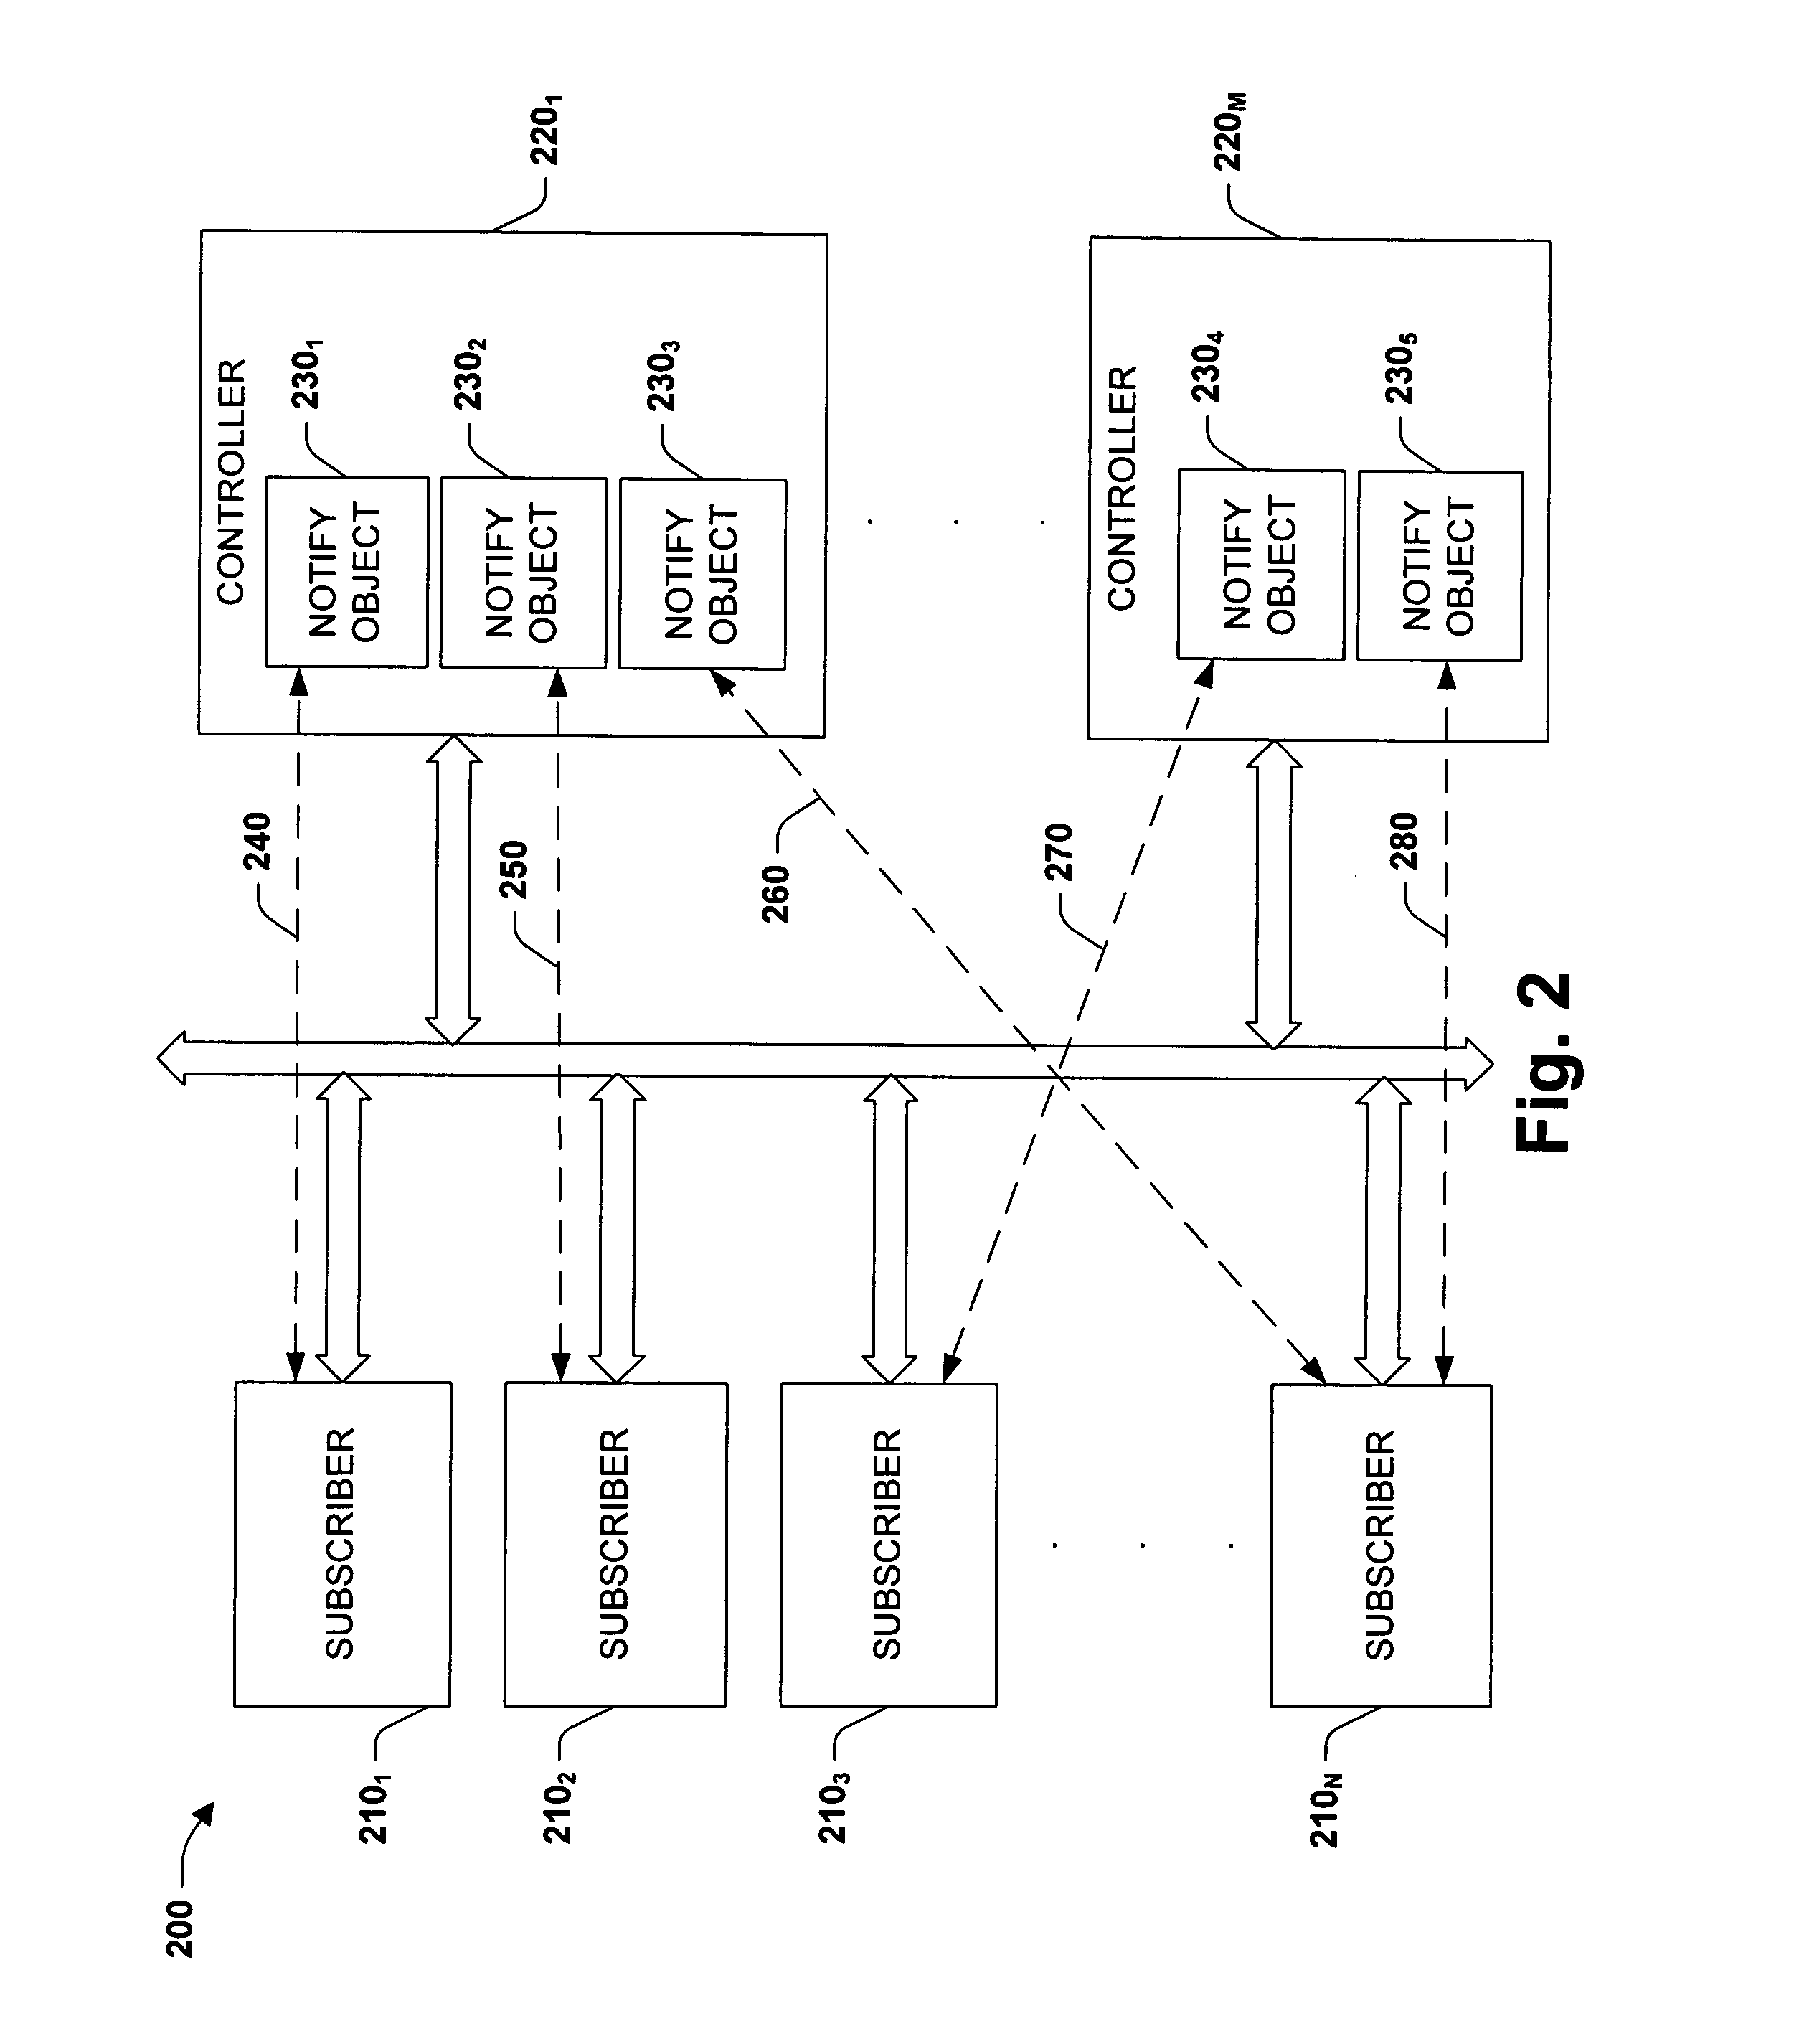 Systems and methods for notifying multiple hosts from an industrial controller